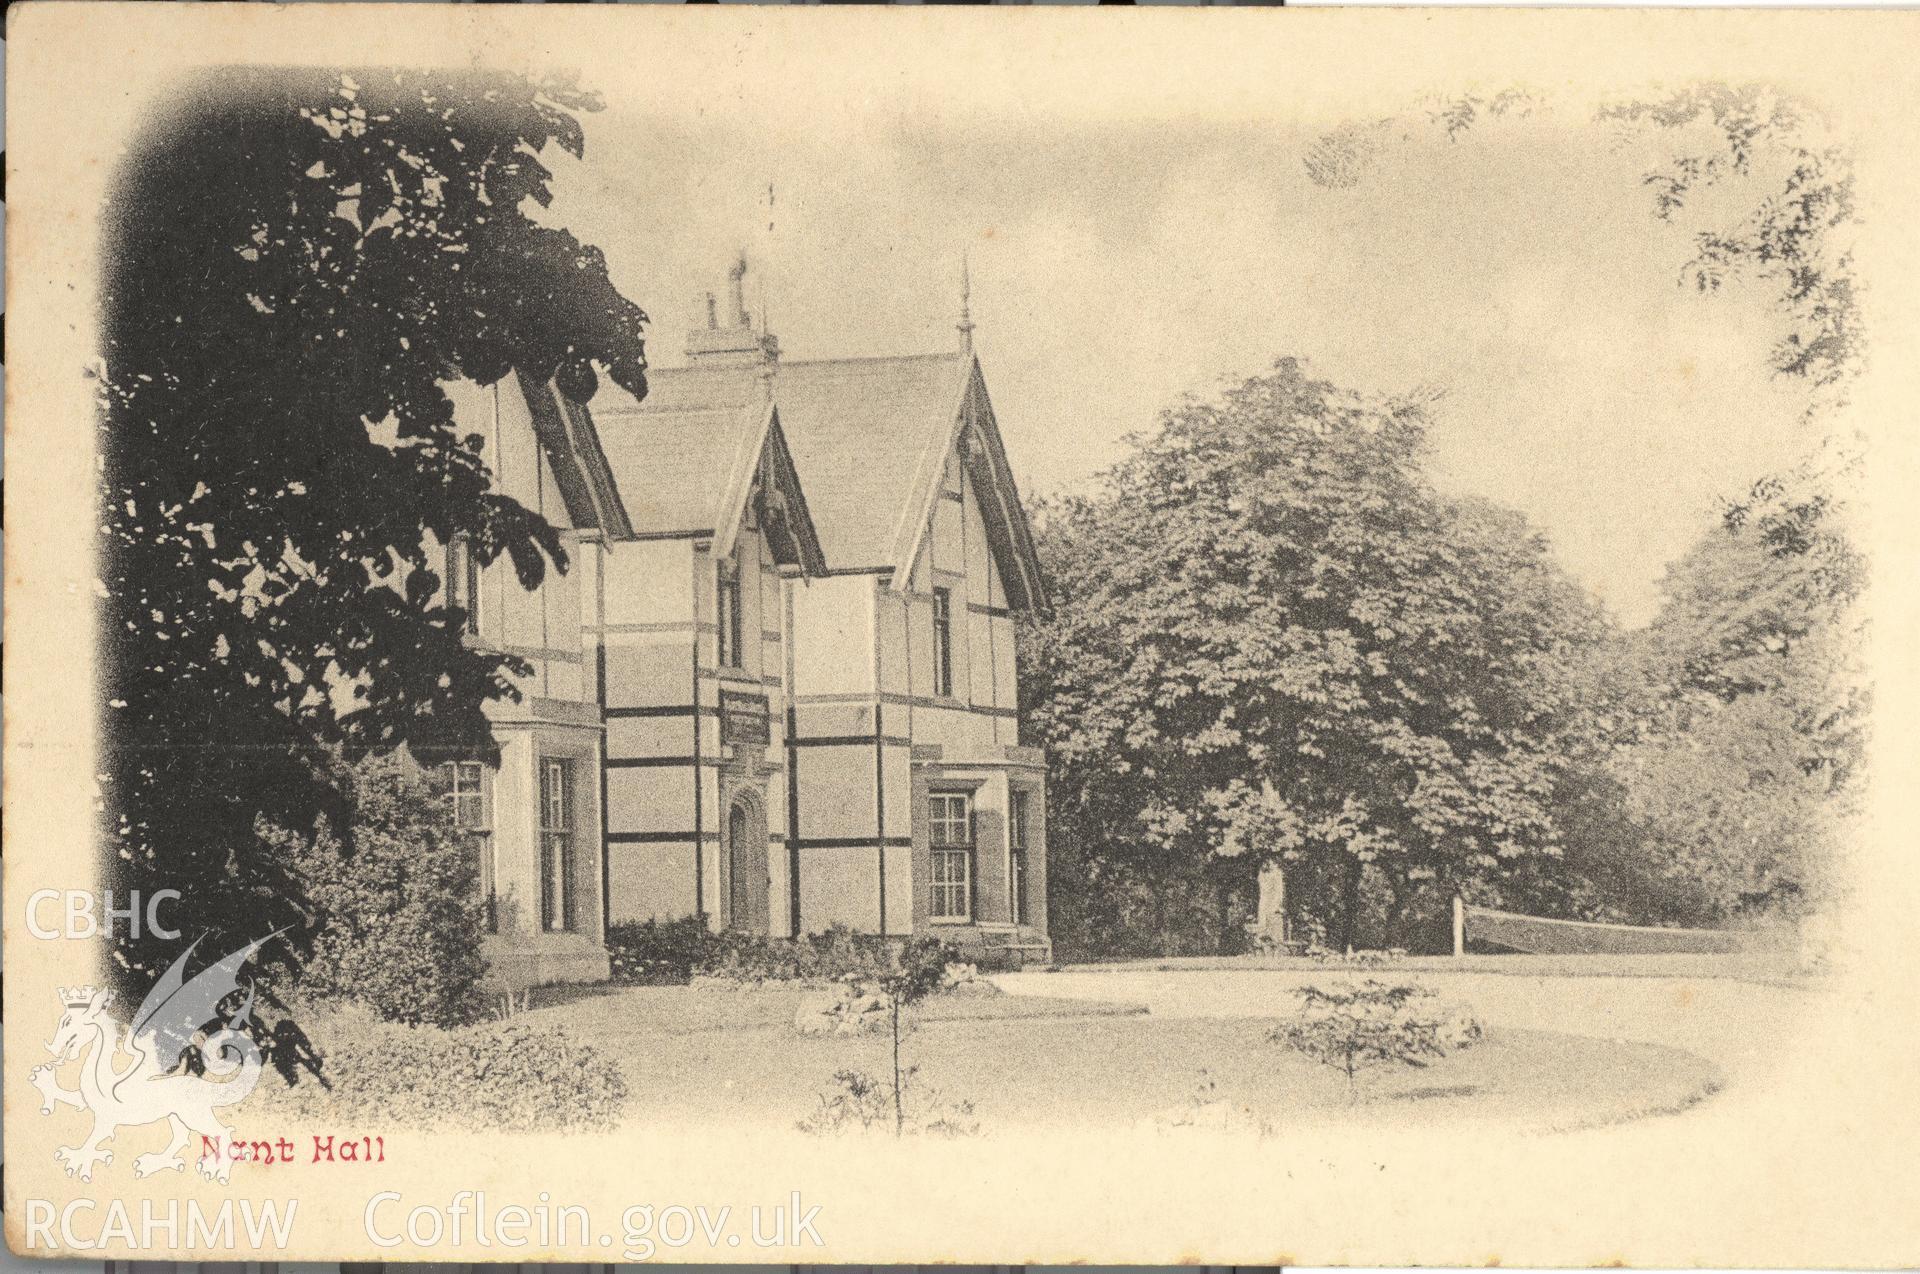 Digitised postcard image of Nant Hall Hotel, Prestatyn. Produced by Parks and Gardens Data Services, from an original item in the Peter Davis Collection at Parks and Gardens UK. We hold only web-resolution images of this collection, suitable for viewing on screen and for research purposes only. We do not hold the original images, or publication quality scans.